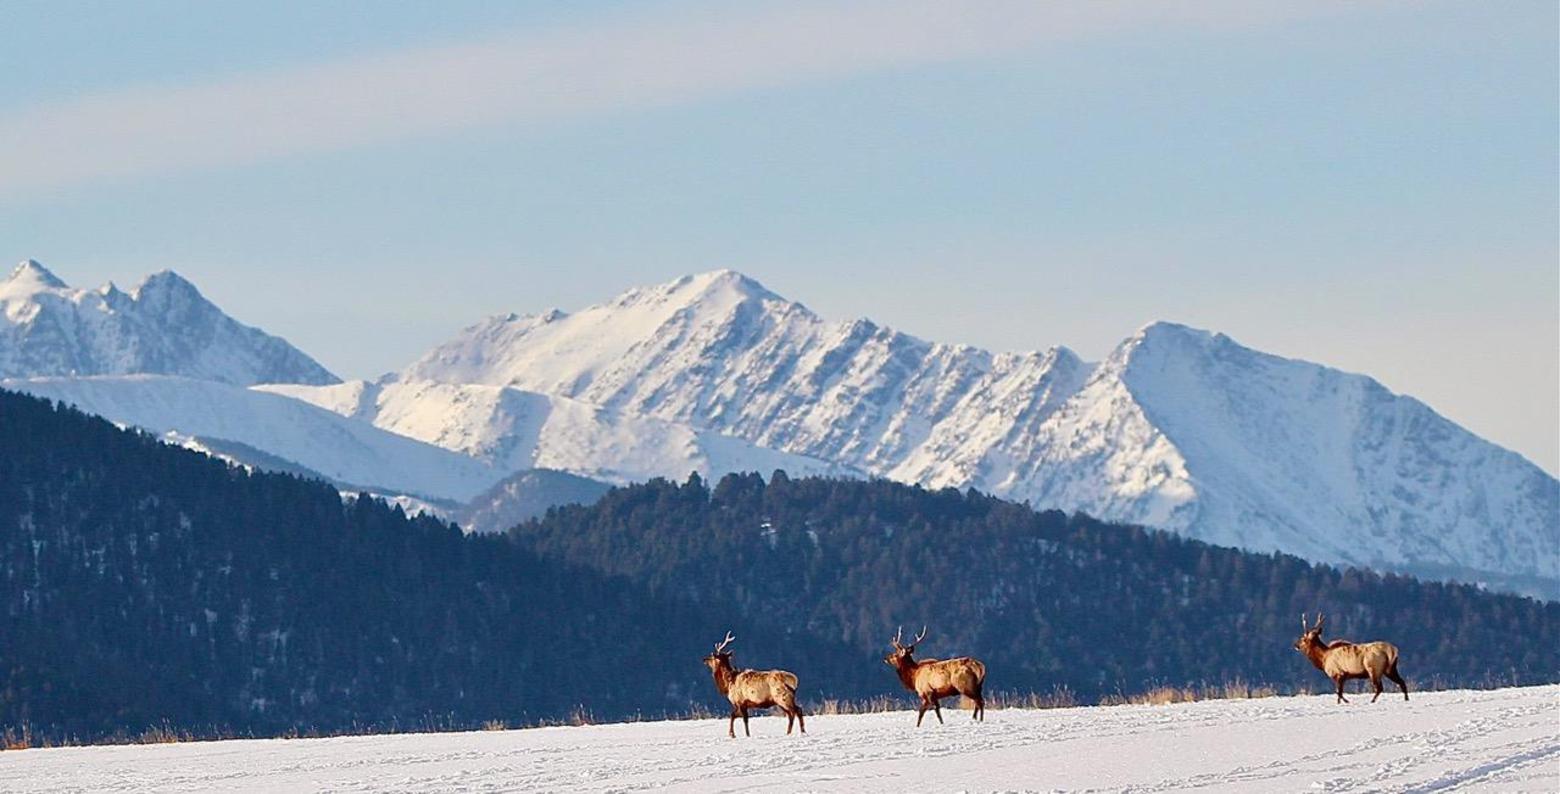 Top photo: An image that Pippel titled "Cold Moon" and below it elk wander the southern Gallatin Valley with the Spanish Peaks towering behind. Will majestic scenes like this become things of the past between the Madison River and the Bridger Range?  Photo by Holly Pippel